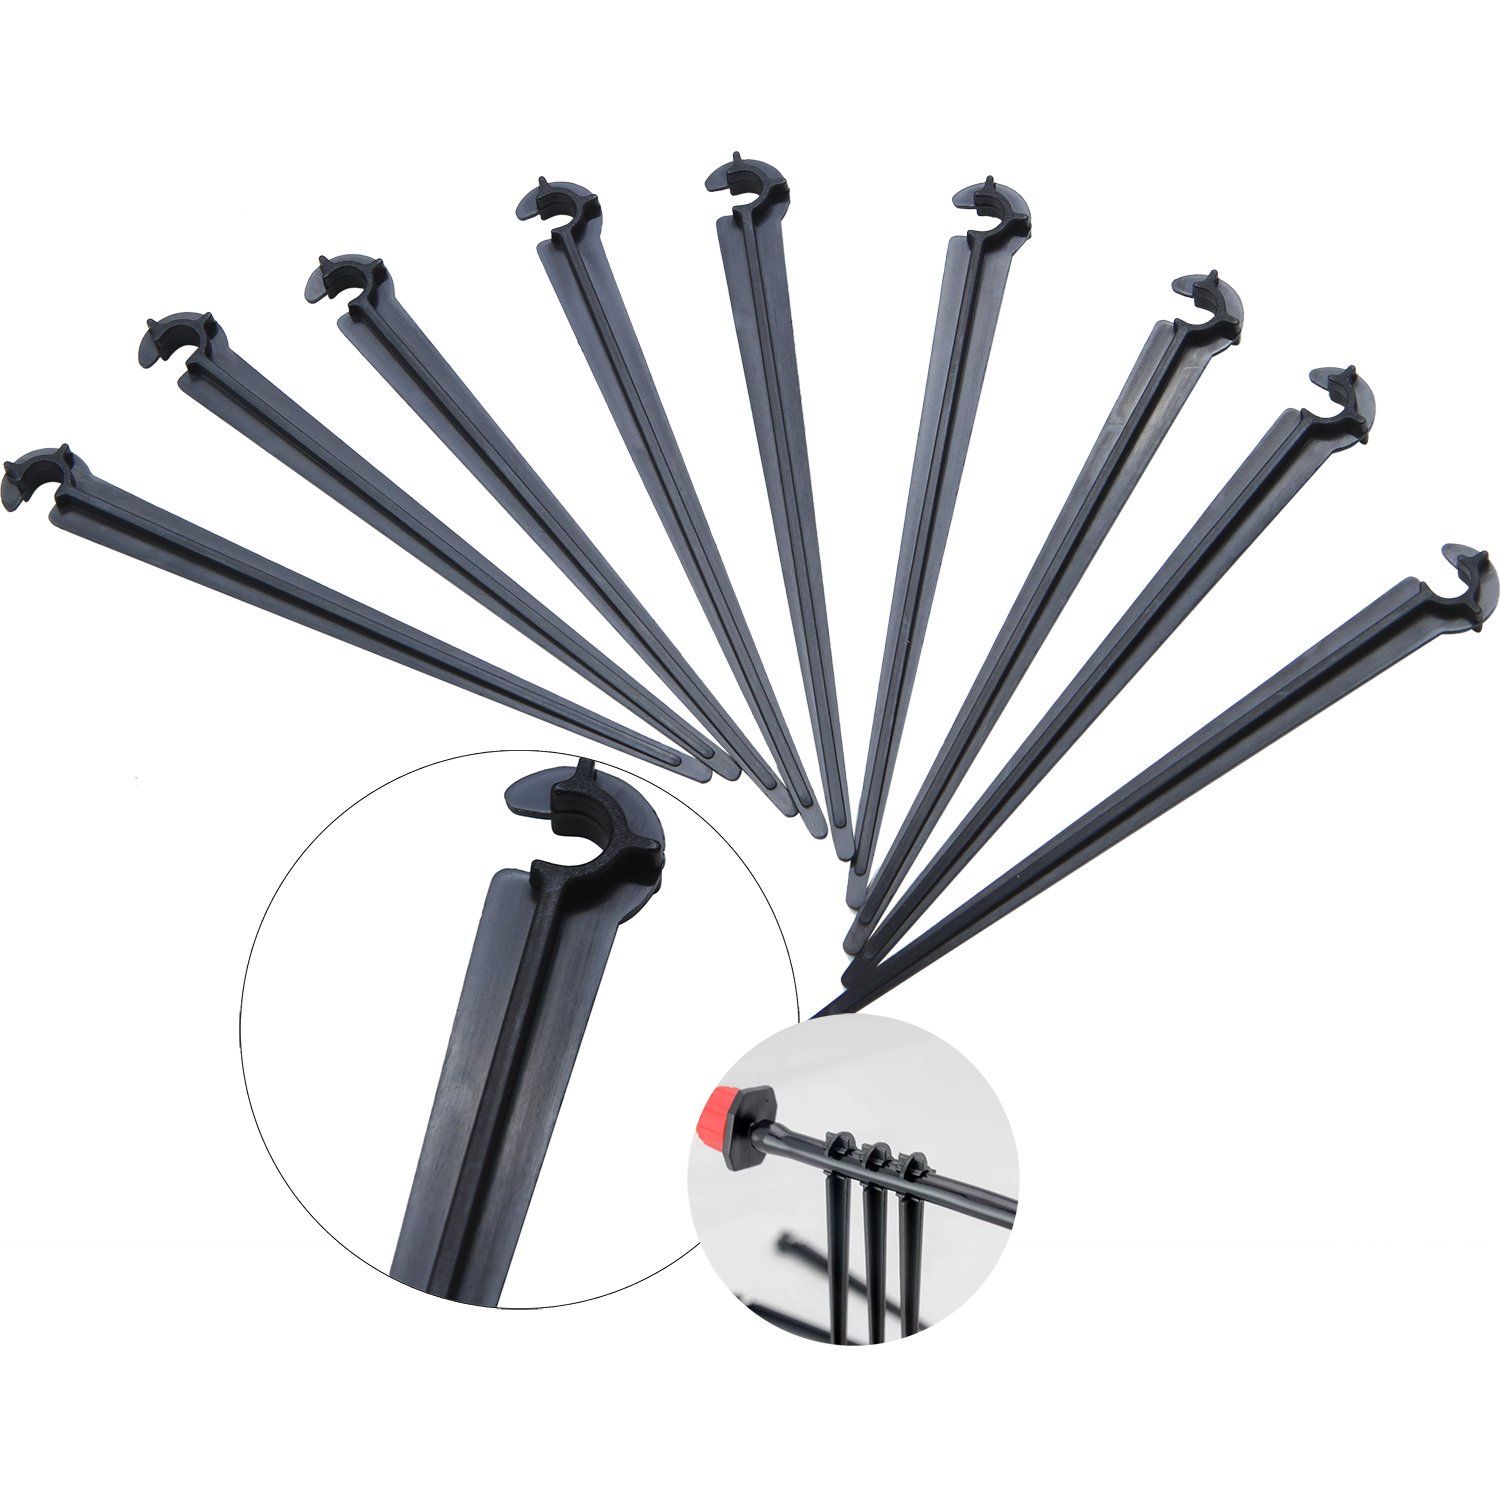 50Pcs-Irrigation-Drip-Support-Stakes-14-Inch-Tubing-Hose-Holder-for-Vegetable-Gardens-or-Flower-Beds-1551833